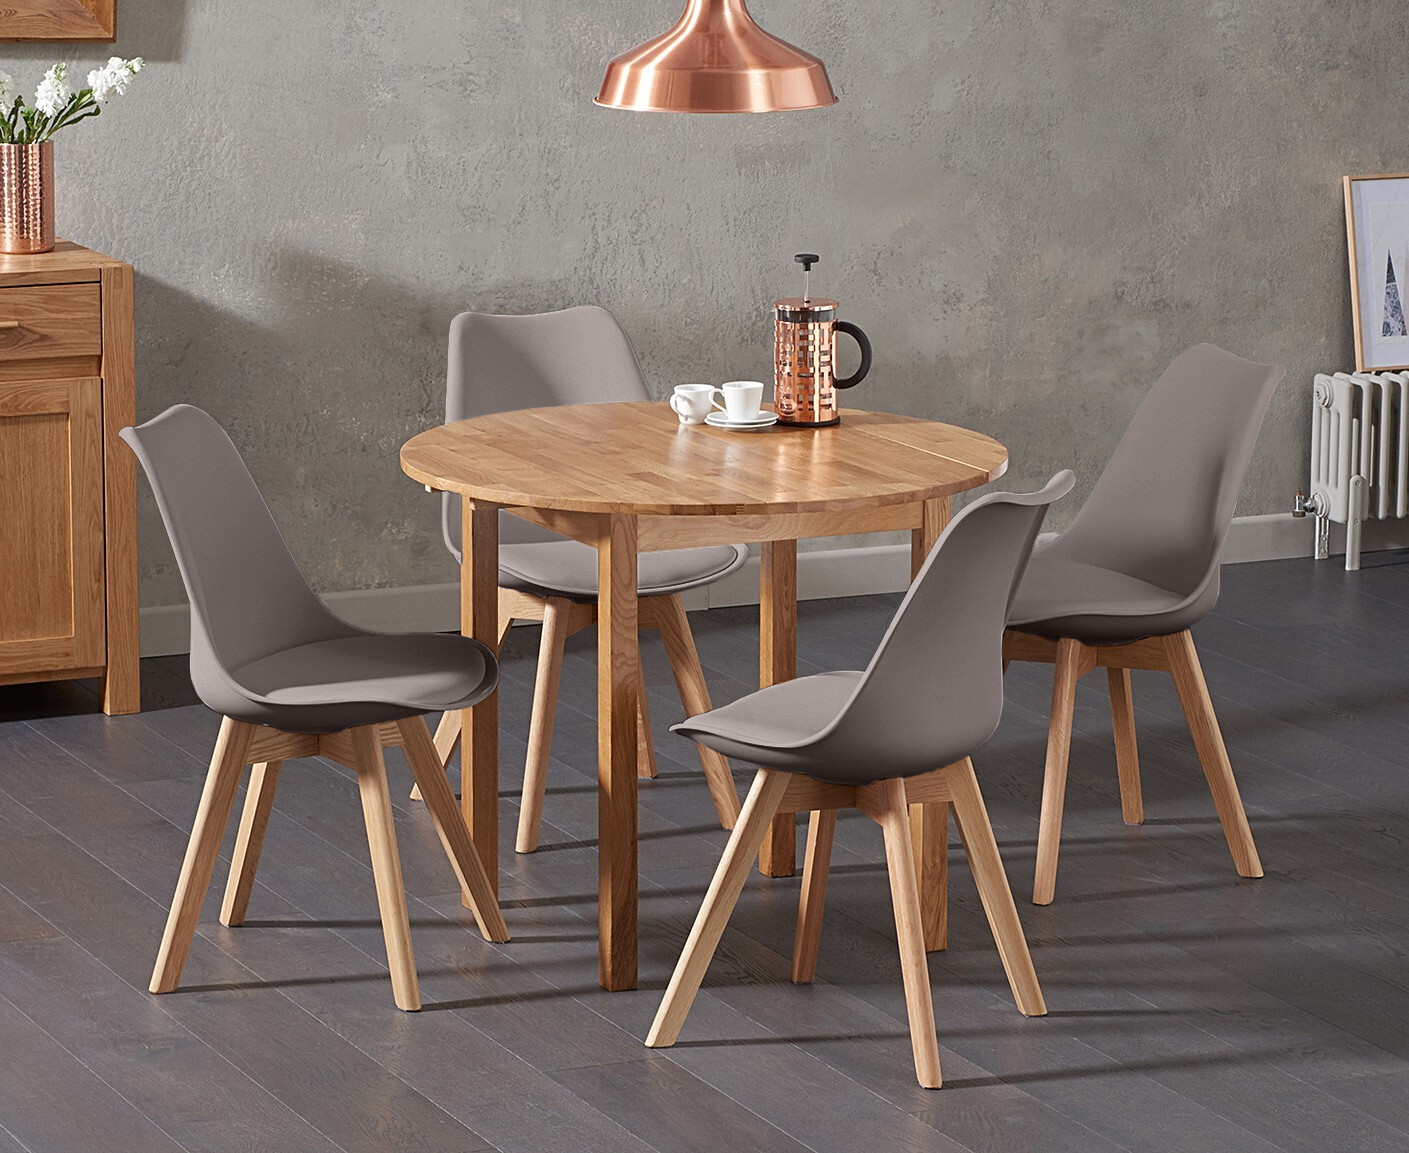 Extending York 90cm Solid Oak Drop Leaf Dining Table With 2 Mink Orson Faux Leather Chairs